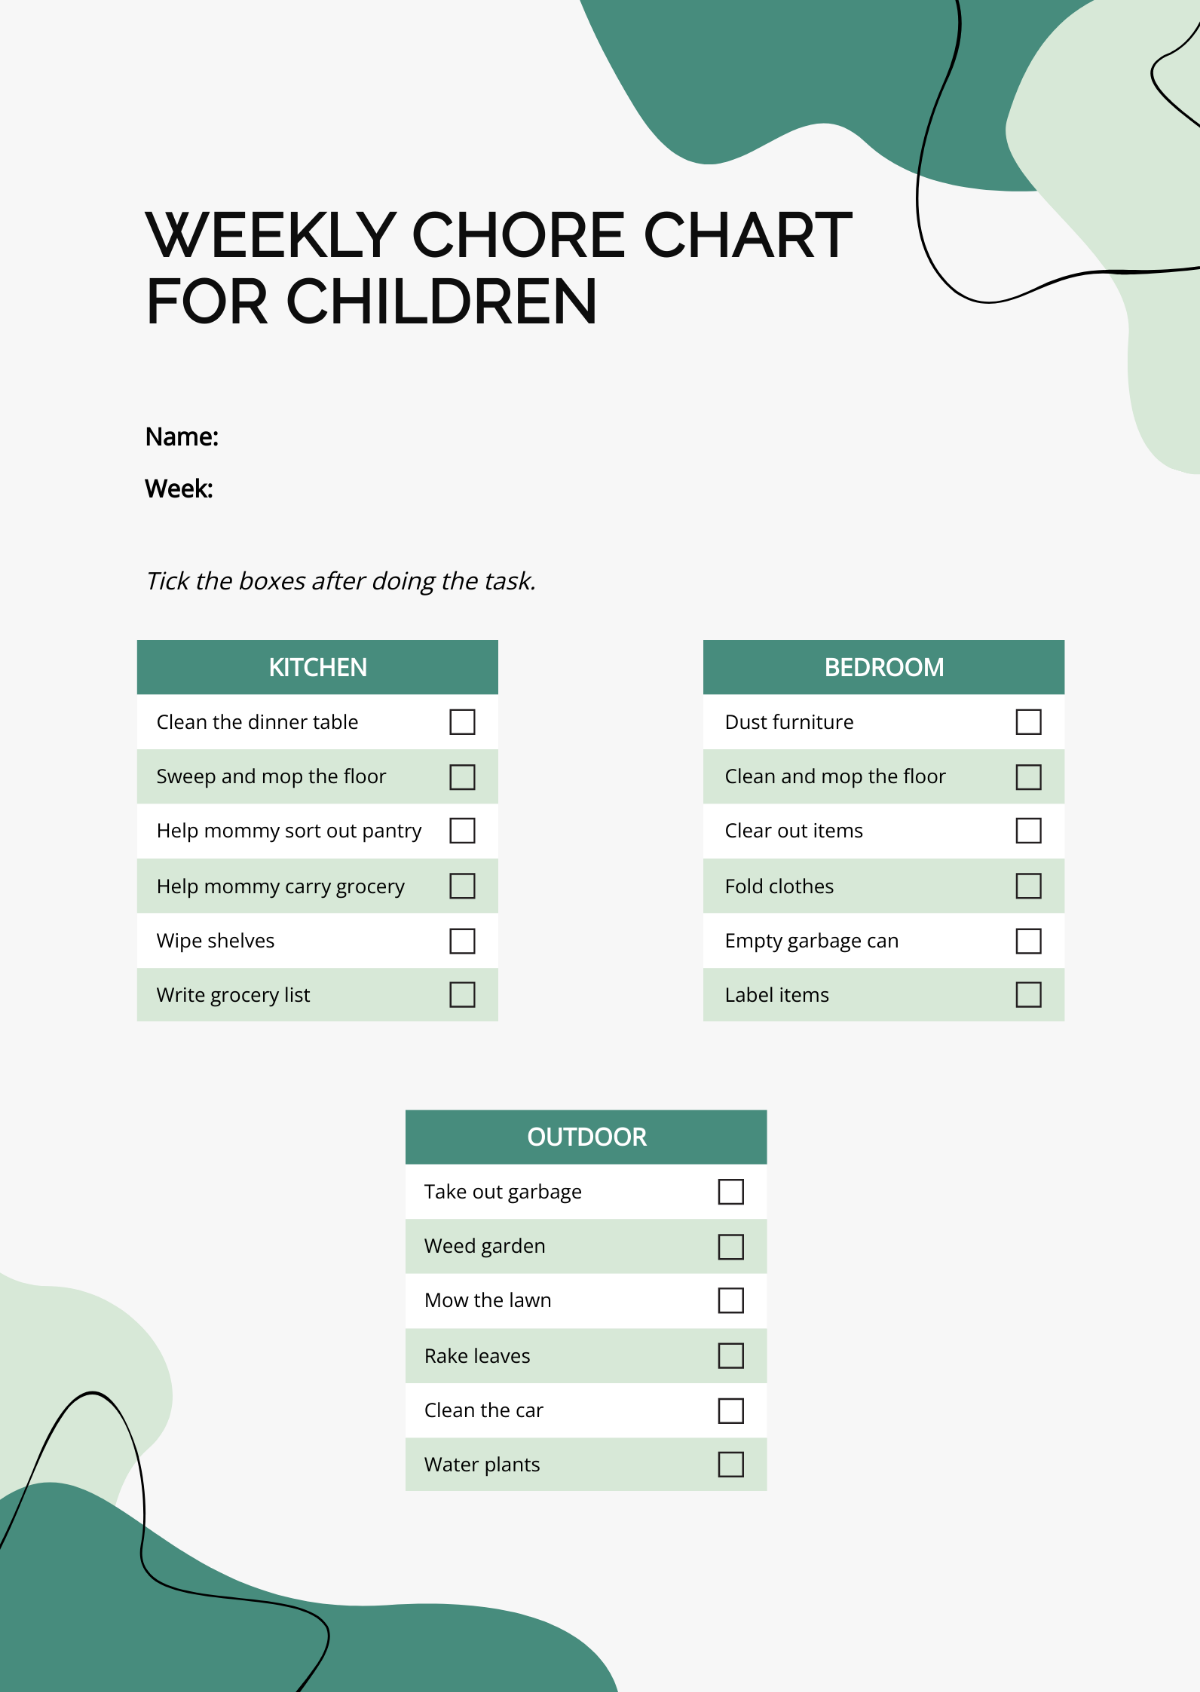 Weekly Chore Chart For Children Template